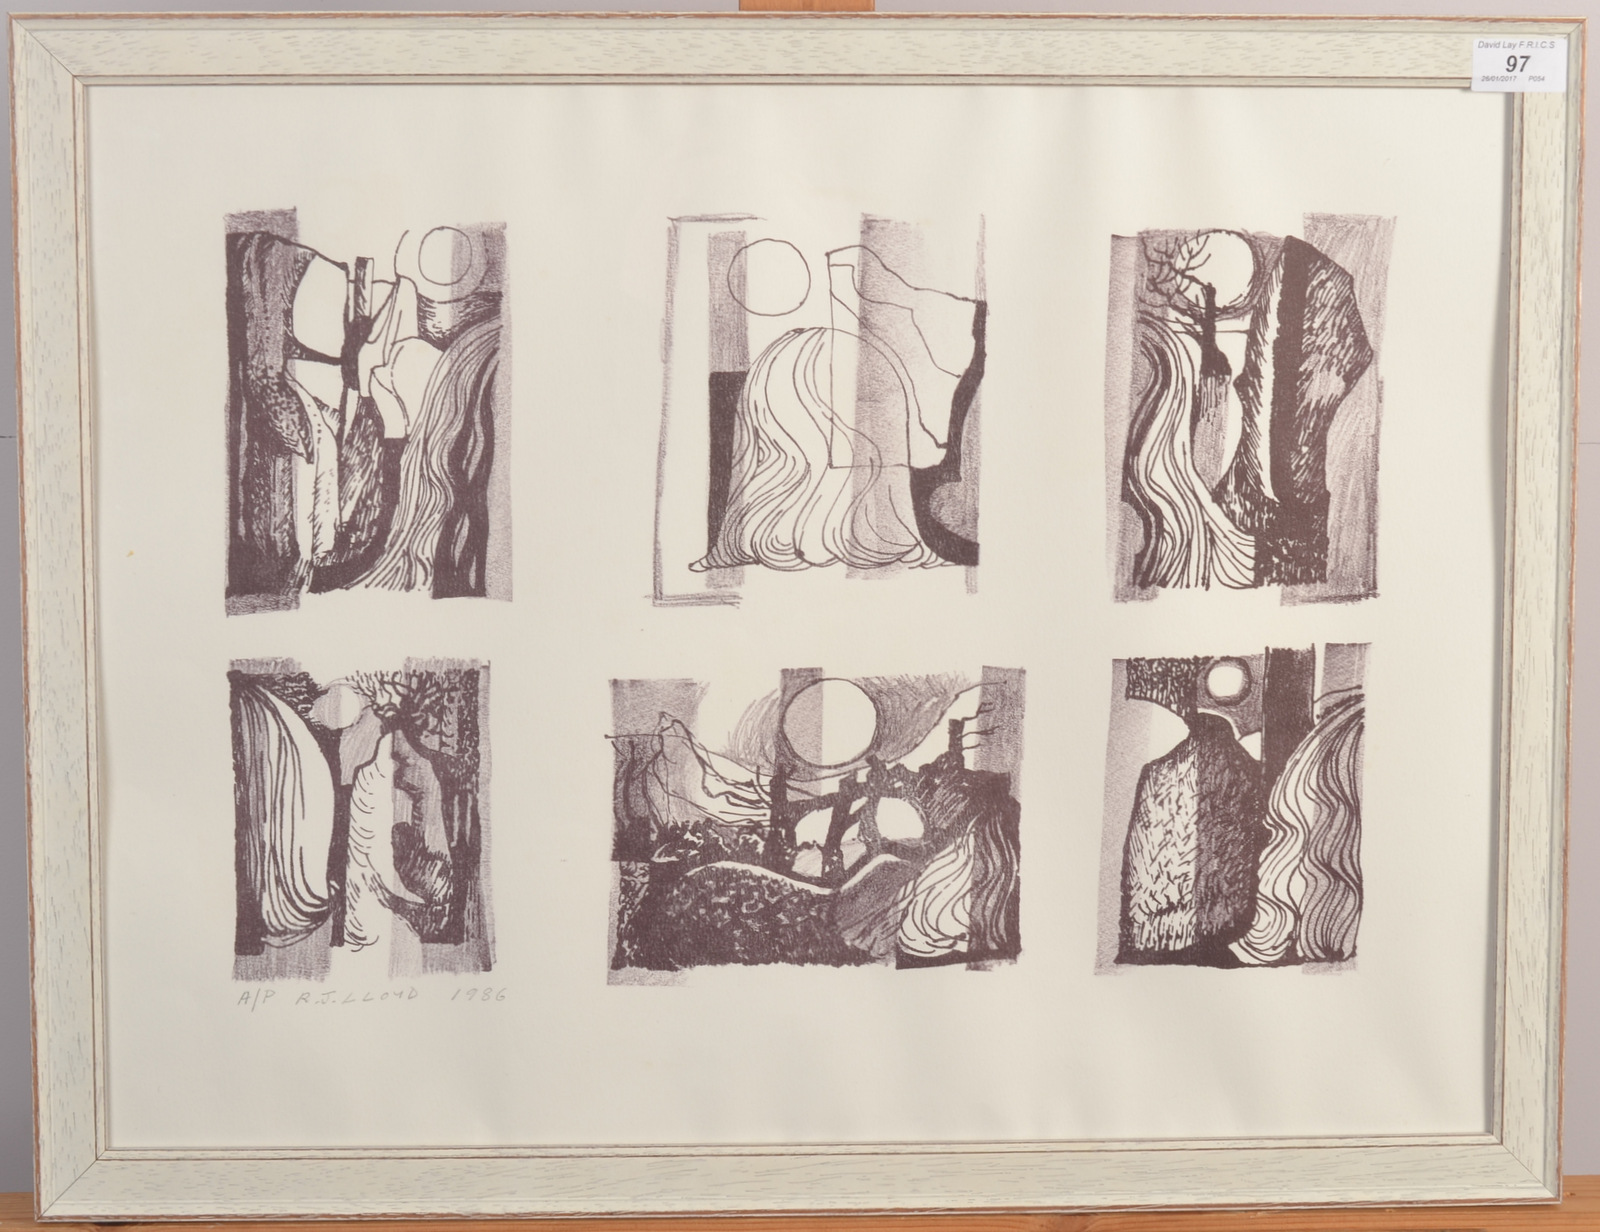 REGINALD JAMES LLOYD Six Studies Lithograph A/P Signed and dated 1986 Paper size 43 x 57cm - Image 2 of 2